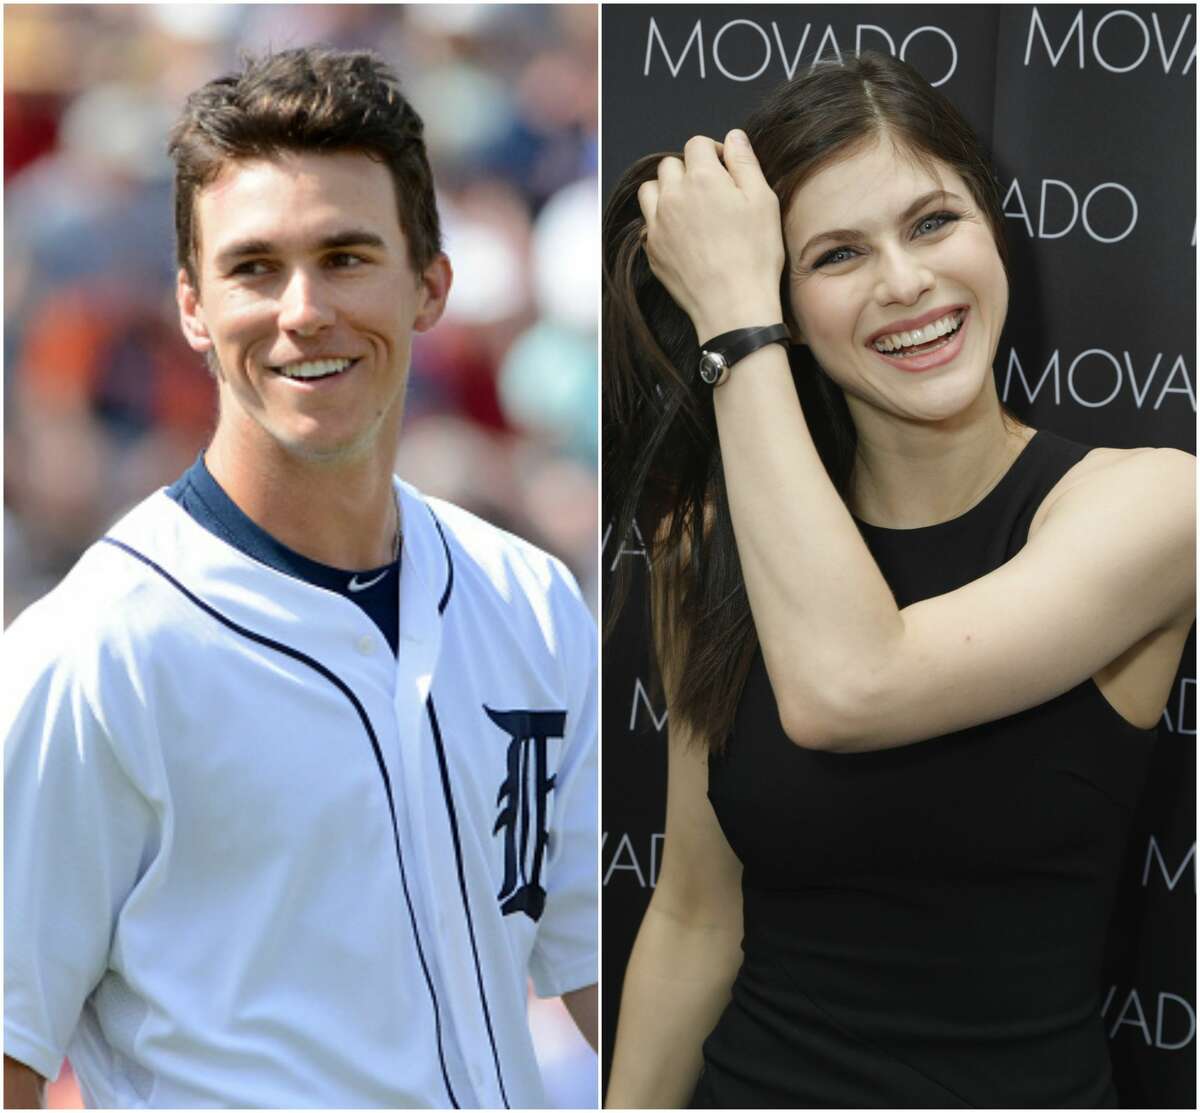 Is it official? Family members confirm Justin Verlander is dating